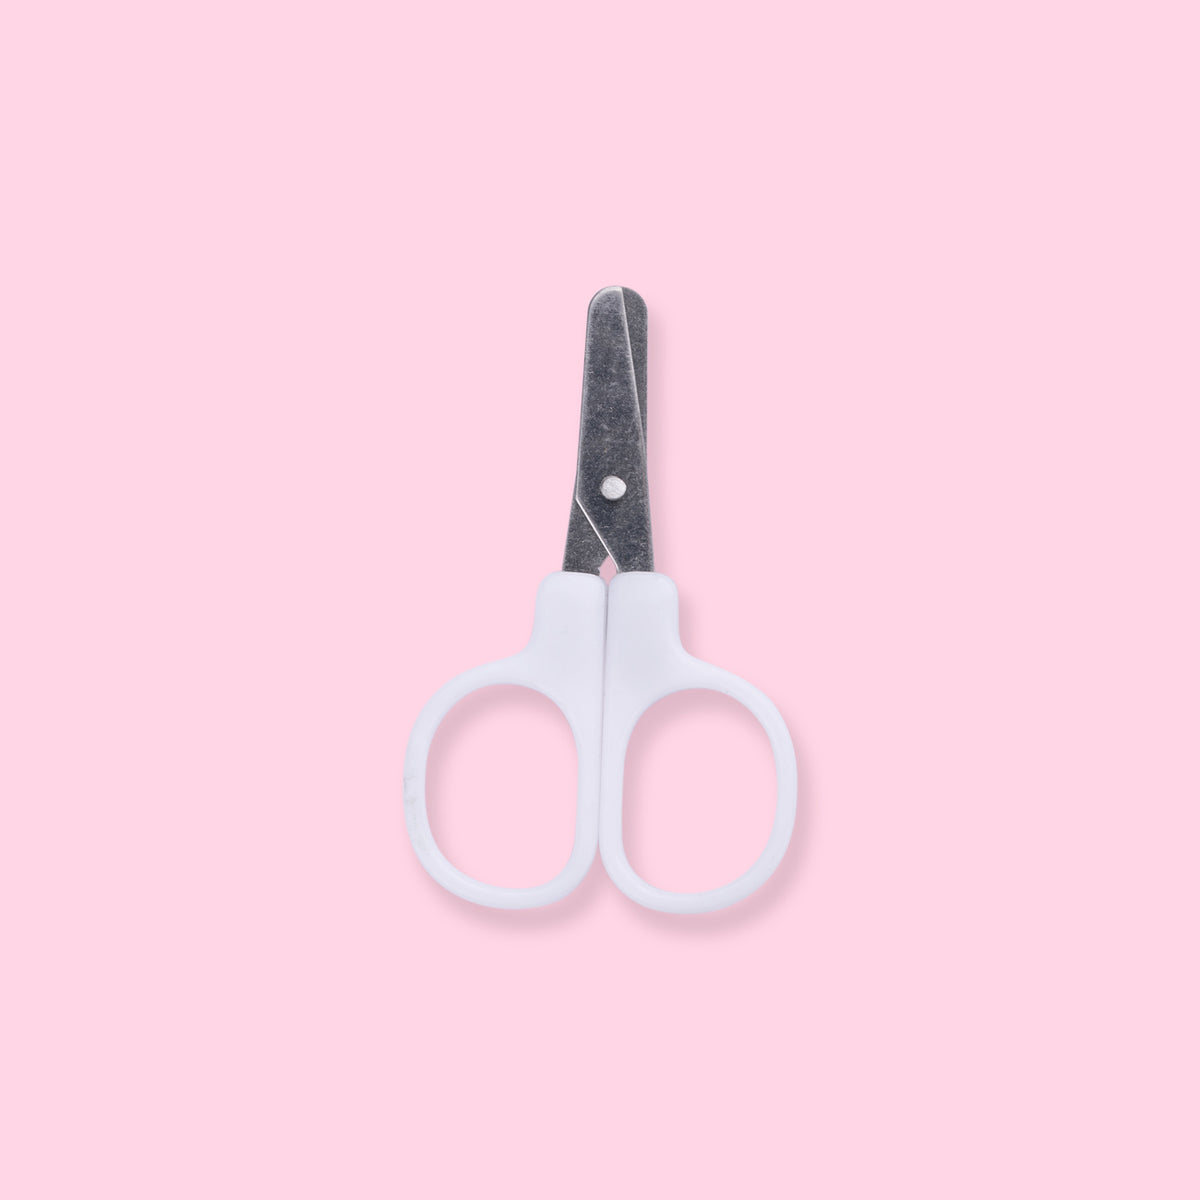 Pile Colourful Scrapbooking Scissors On White Stock Photo